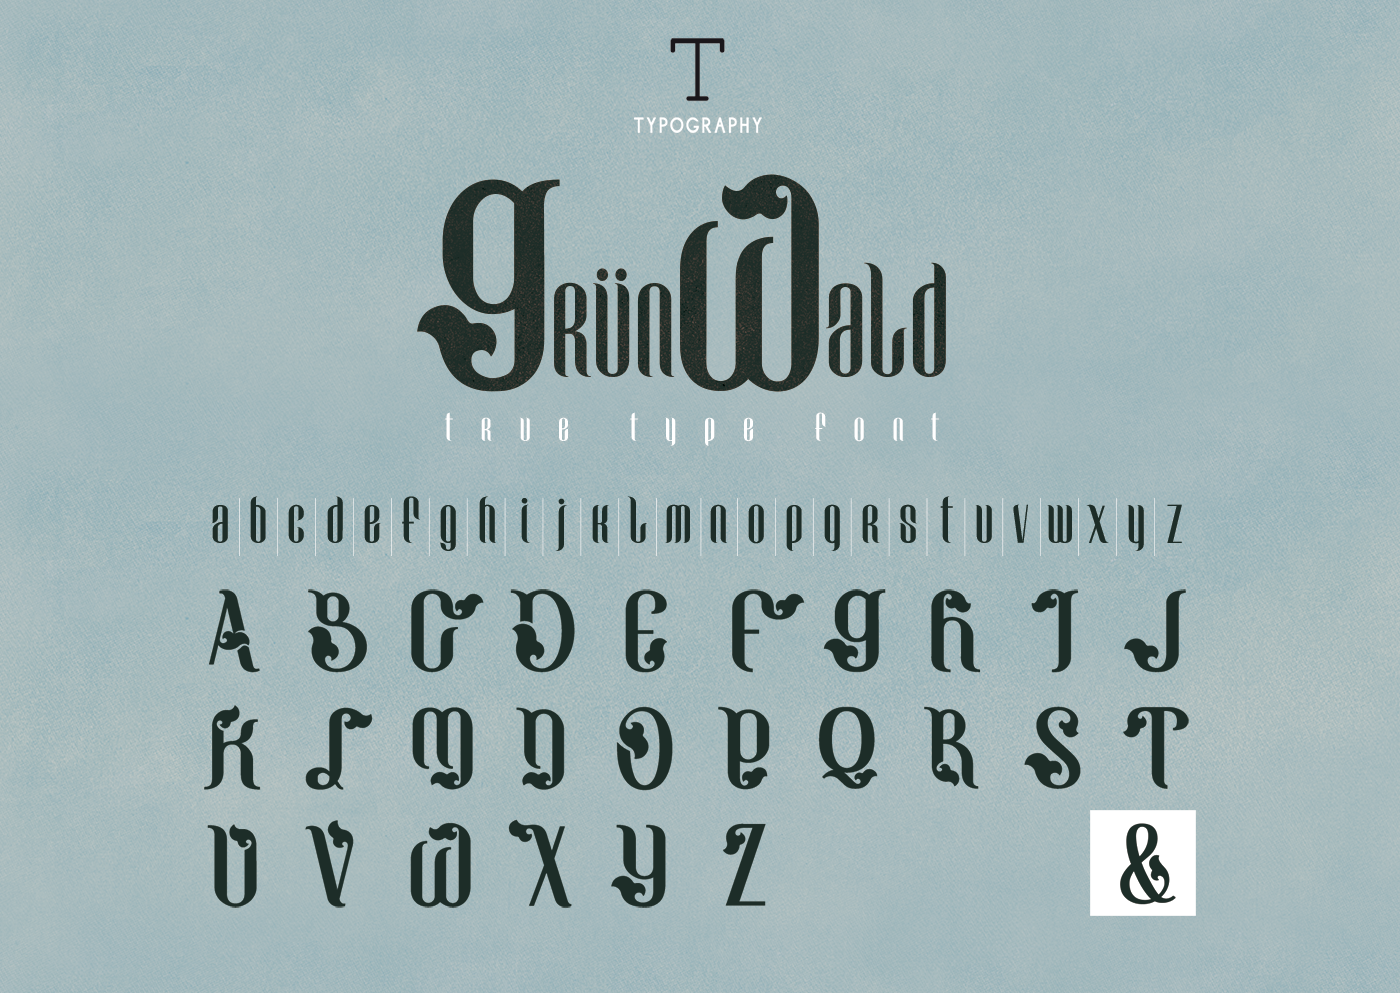 Grunwald old type French art condensed free download